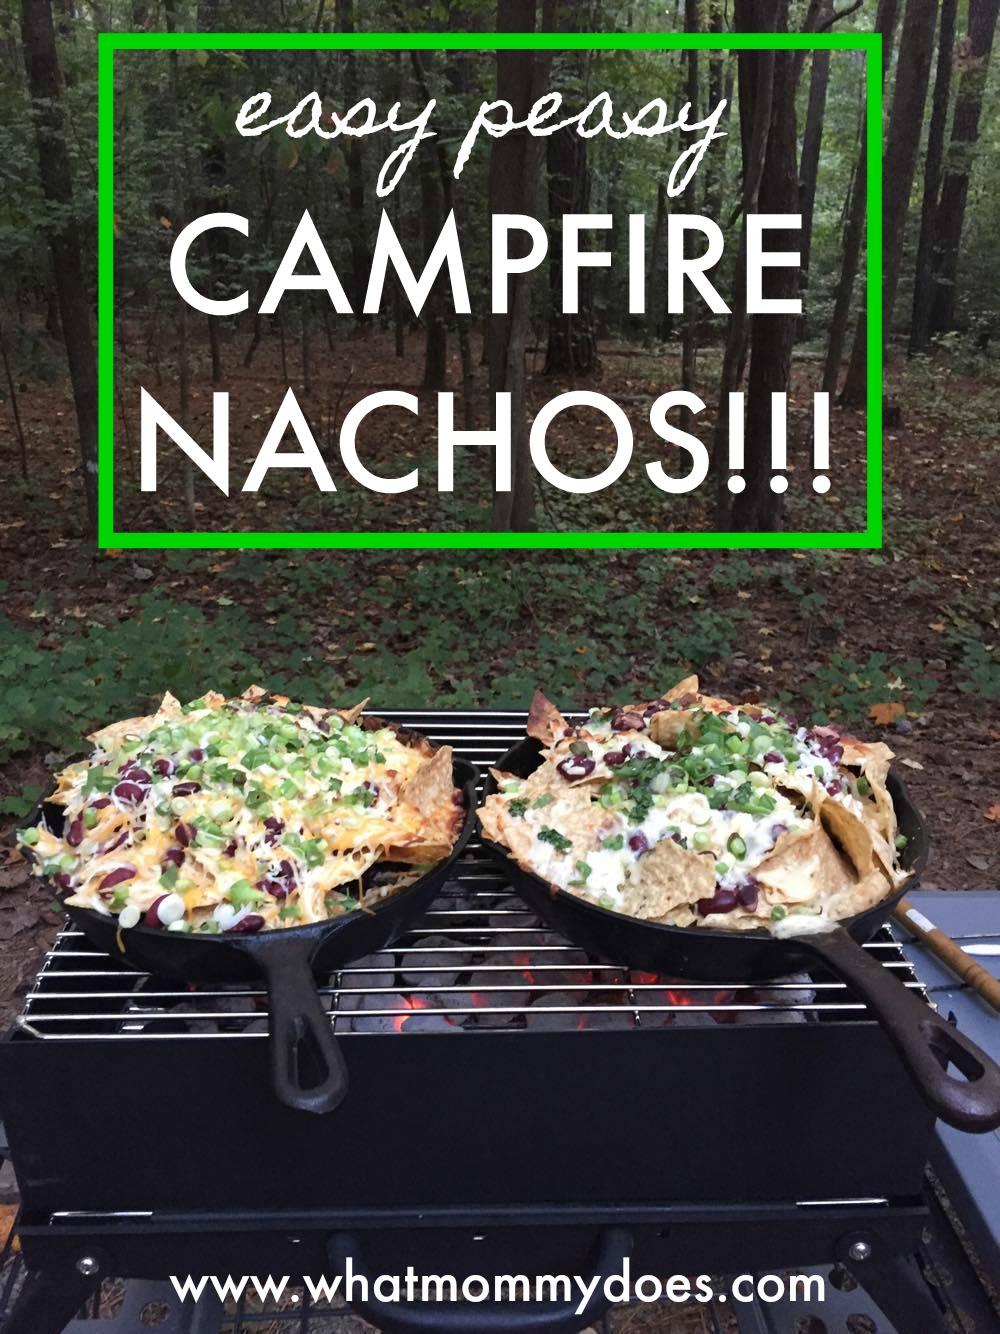 Nachos for our camping trip? Check!! This was the easiest starter for our camping dinner! We used black beans and Cabot cheese, then covered the cast iron skillet w/ foil to melt the cheese faster. Here's a full list of ingredients so you can make them too! You could also do it in a dutch oven or aluminum pan, on the fire or on a propane stove. | easy cast iron campfire nacho recipe, camping meal ideas